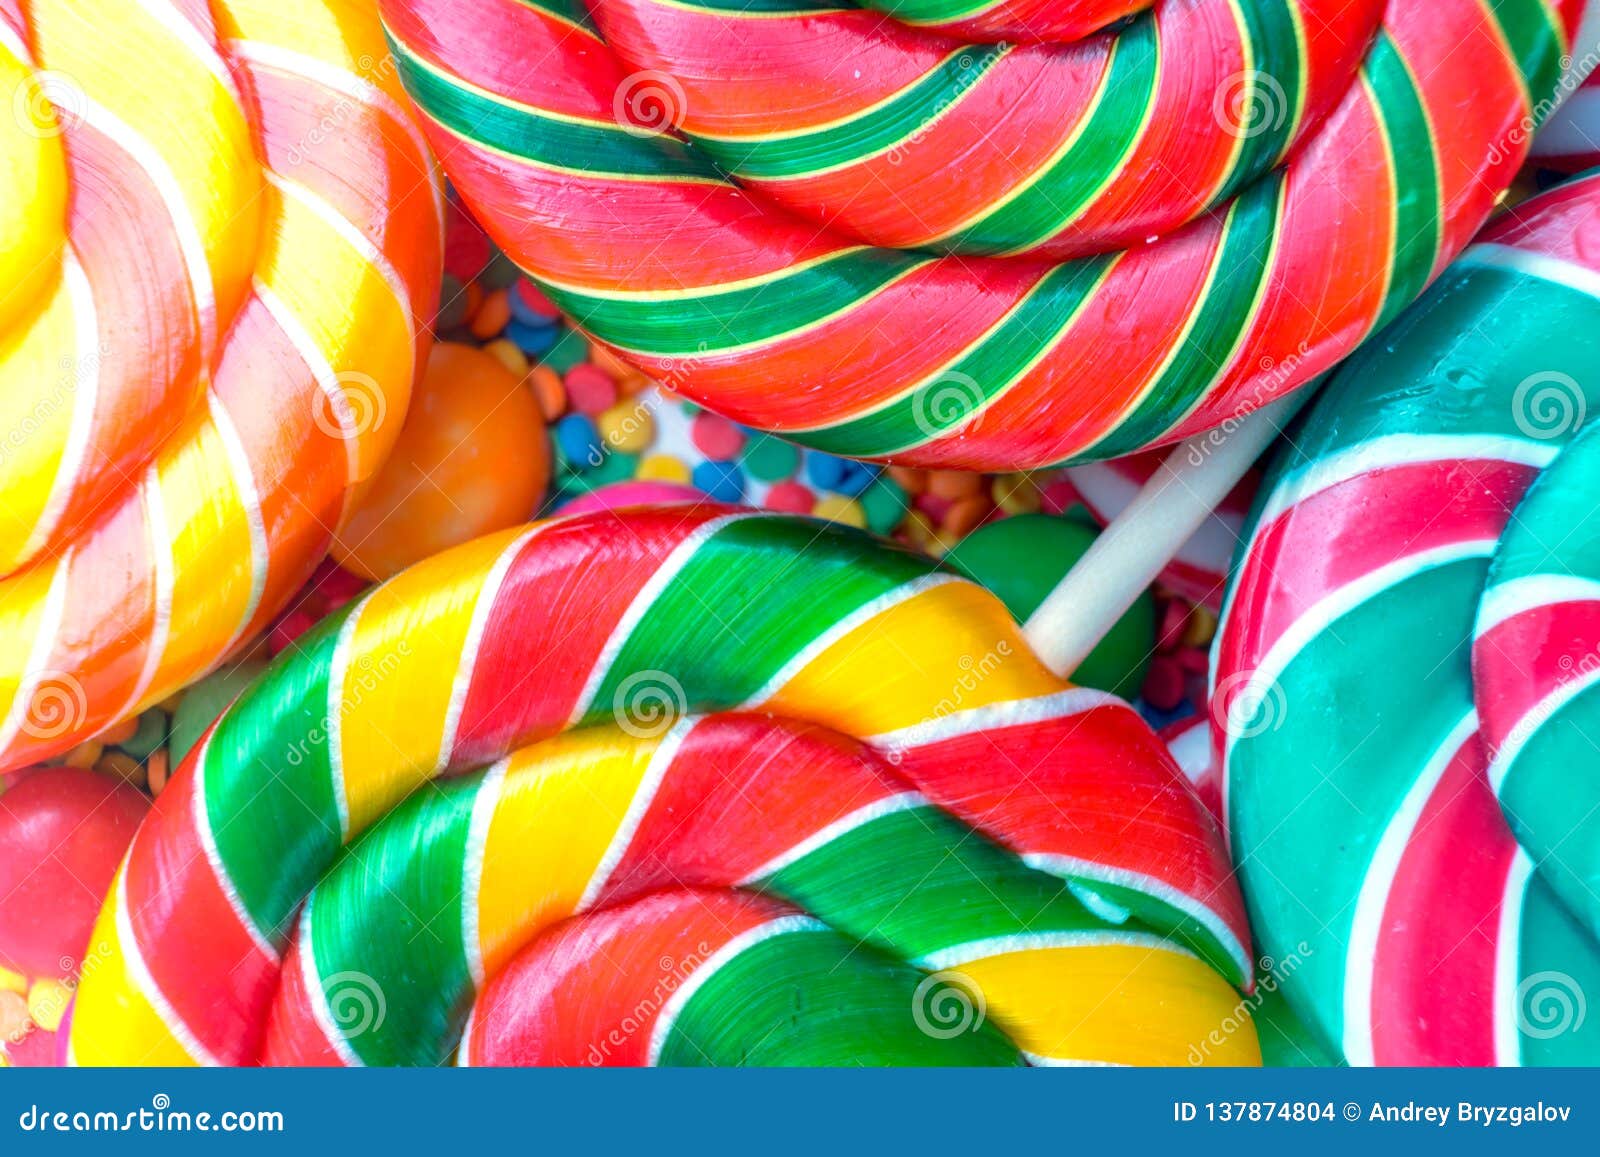 Background From Set Of Colorful Spiral Lollipops Closeup Stock Photo ...